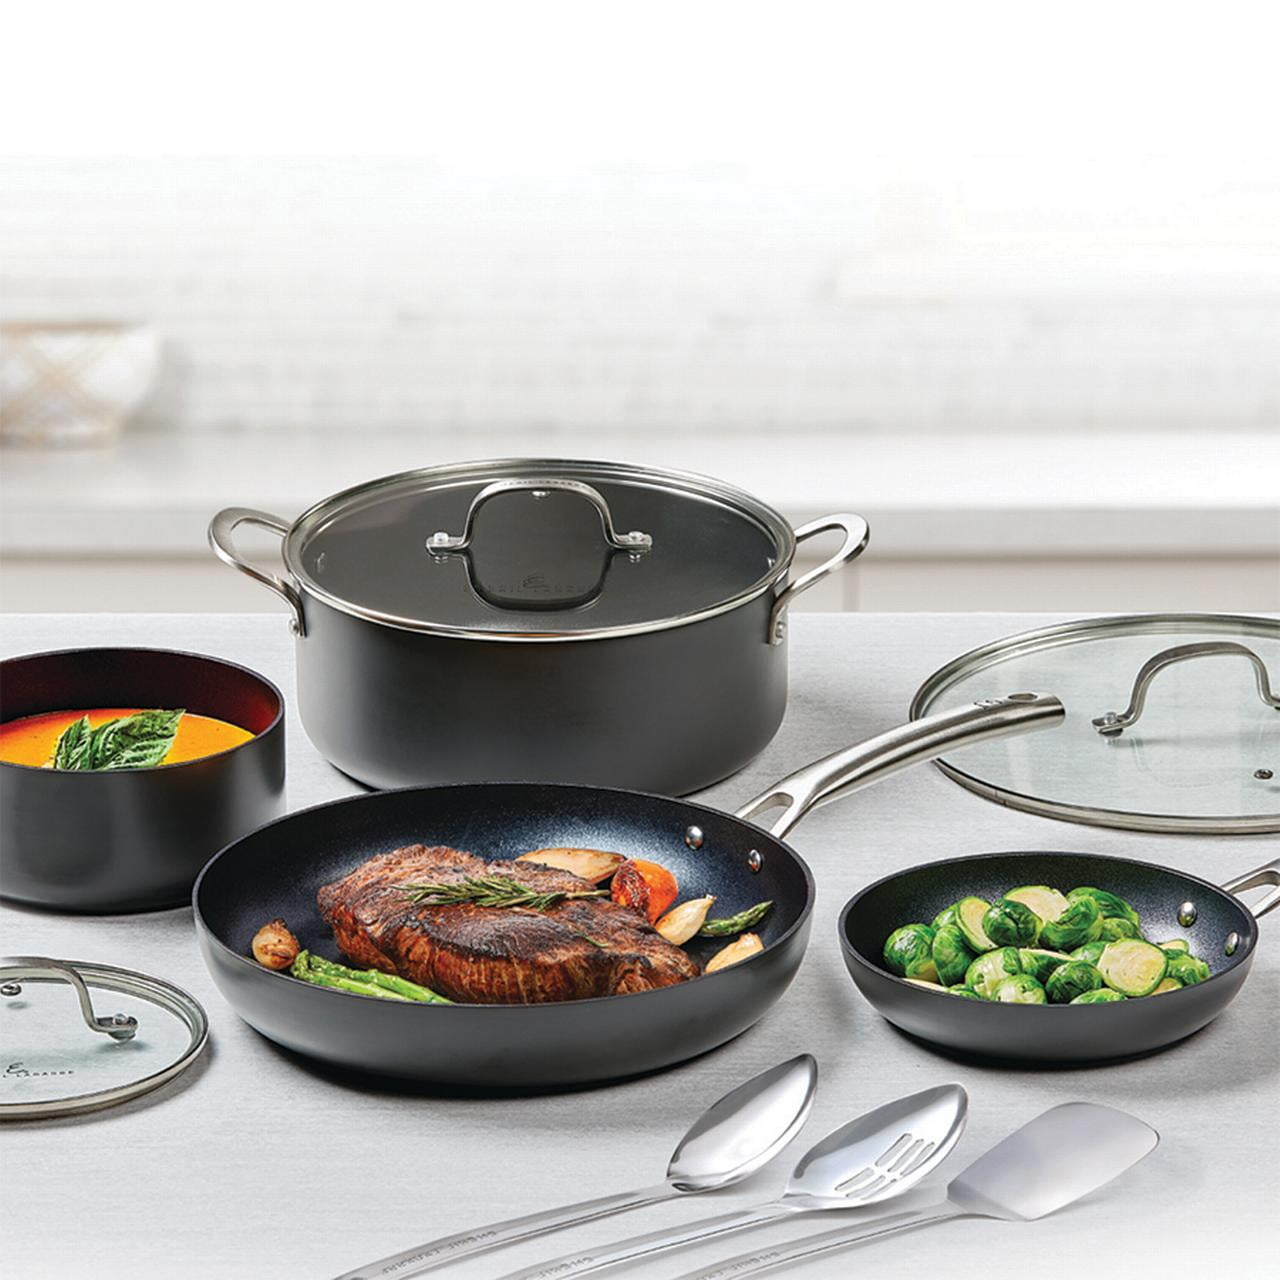 How to season your Emeril Forever Pans #cookware set